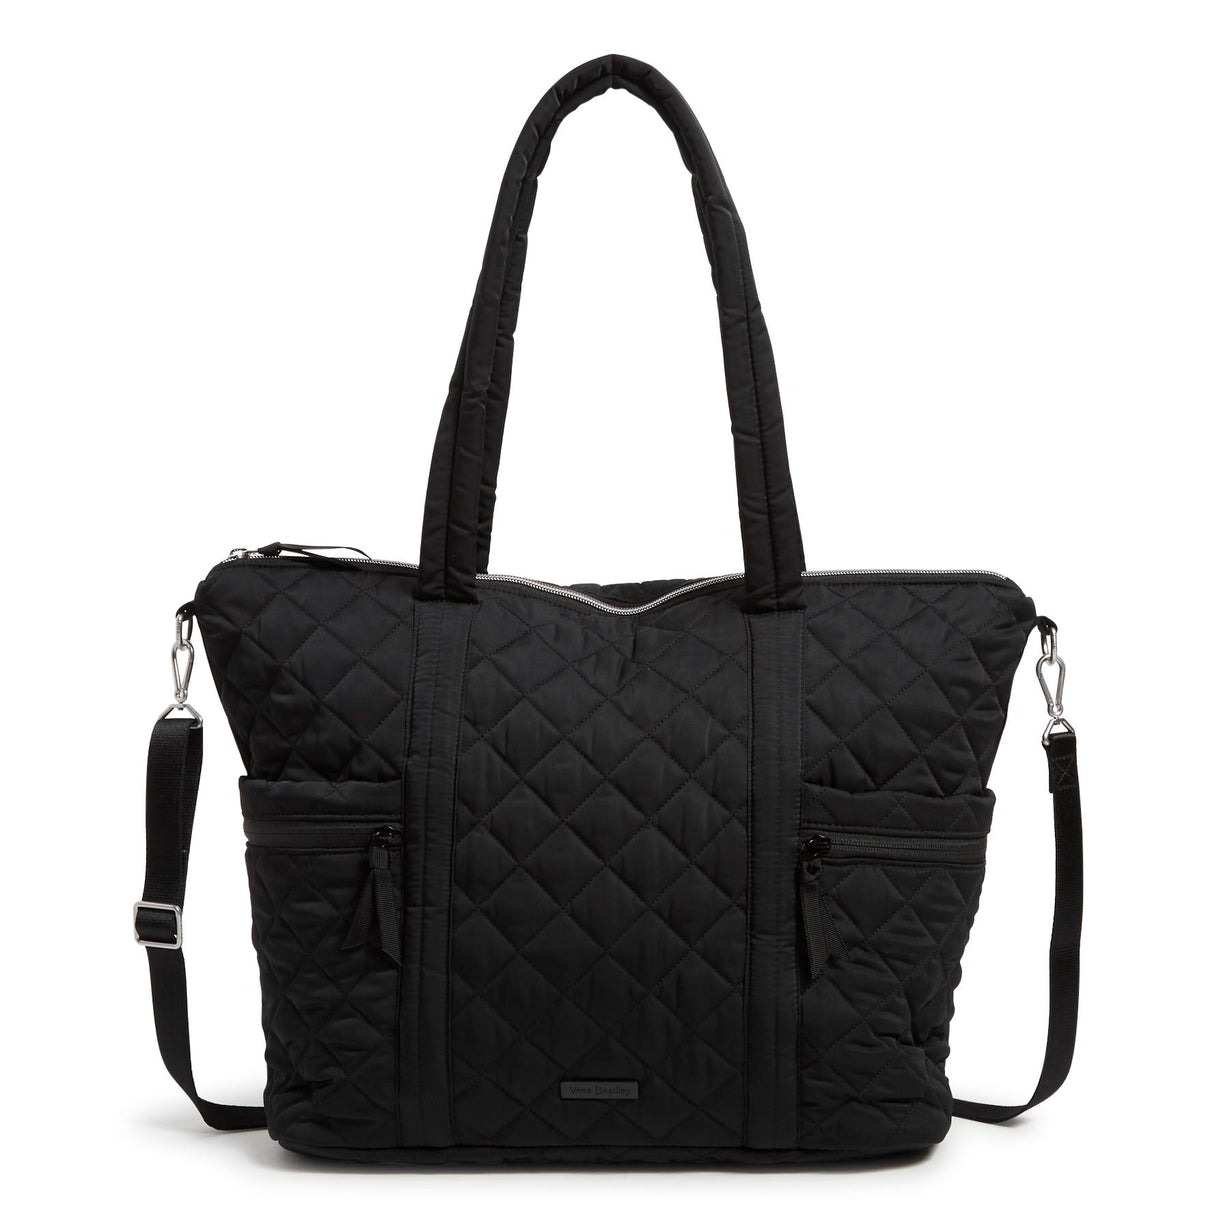 The Getaway Black Faux Leather Quilted Fanny Pack